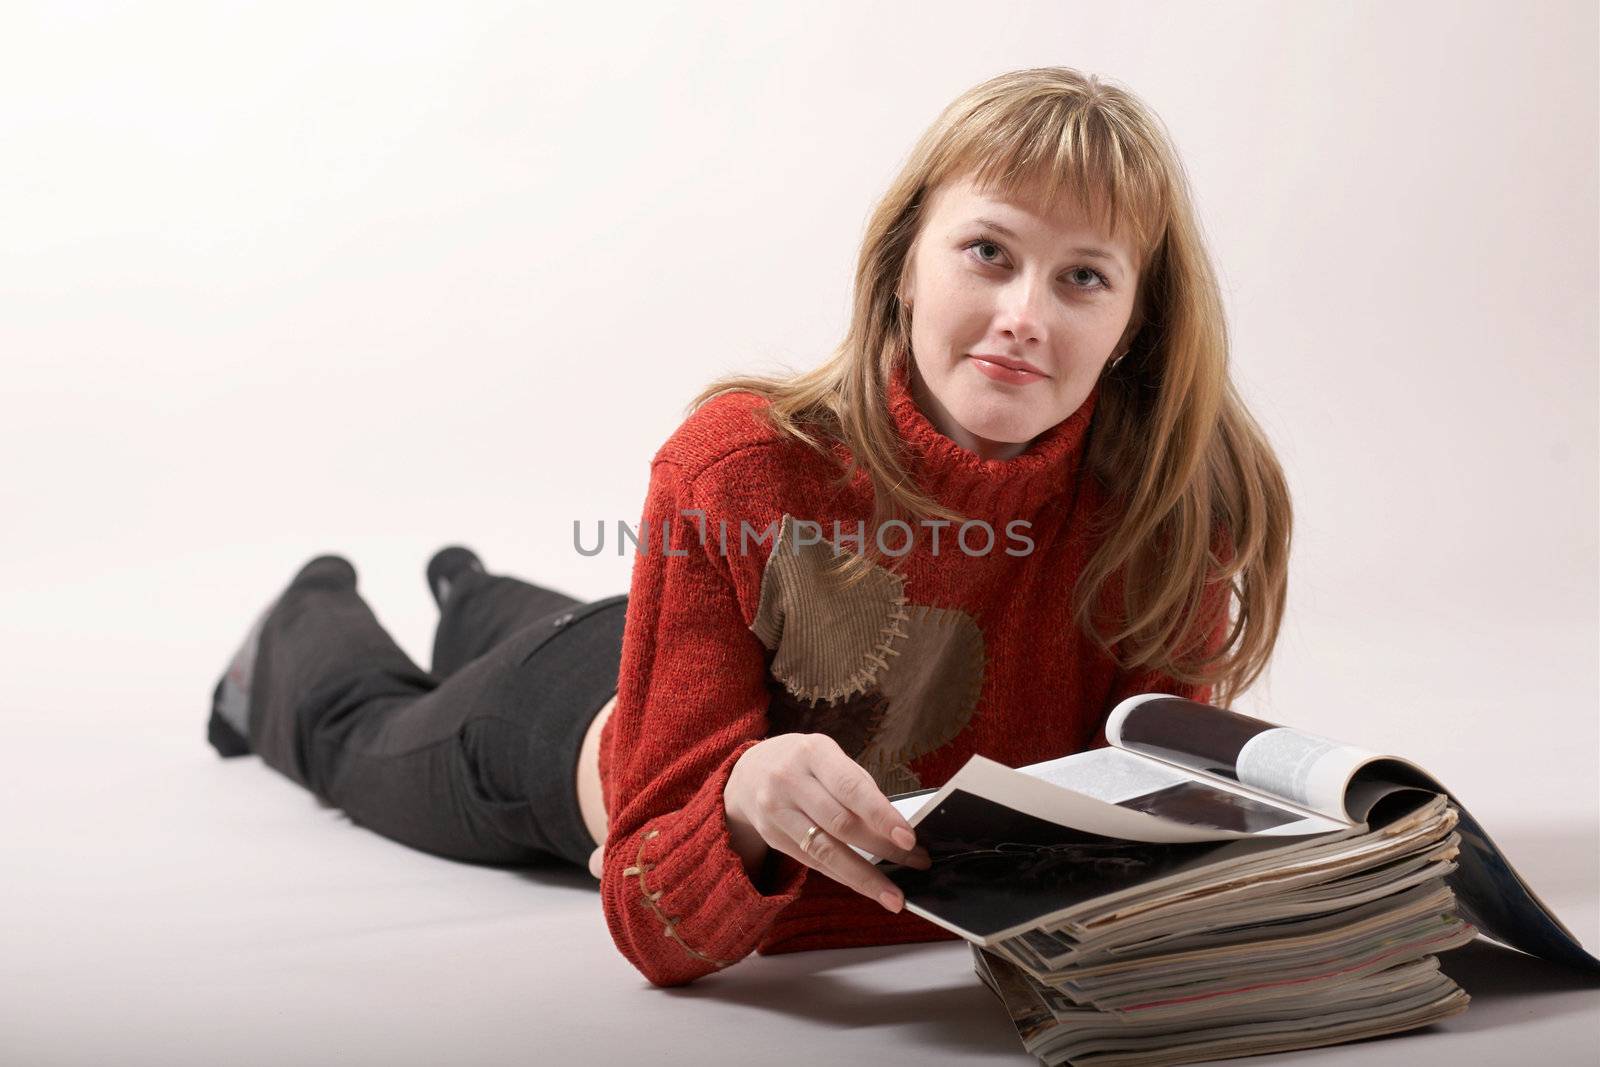 An image of girl luing and reading magazines